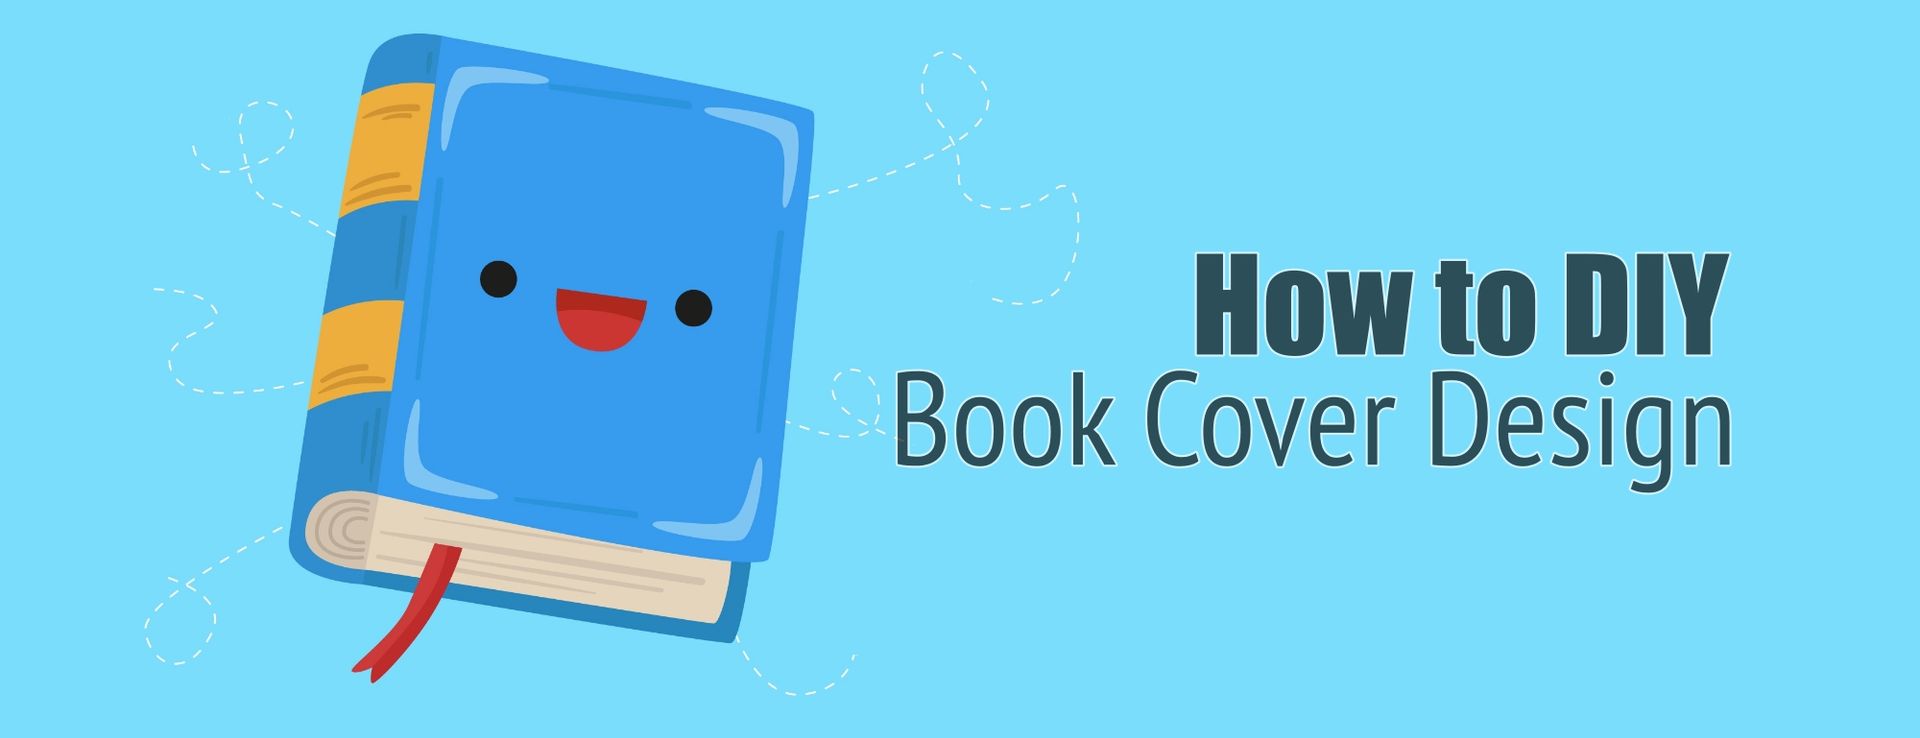 15 Creative Tools for Book Cover Design - Superside